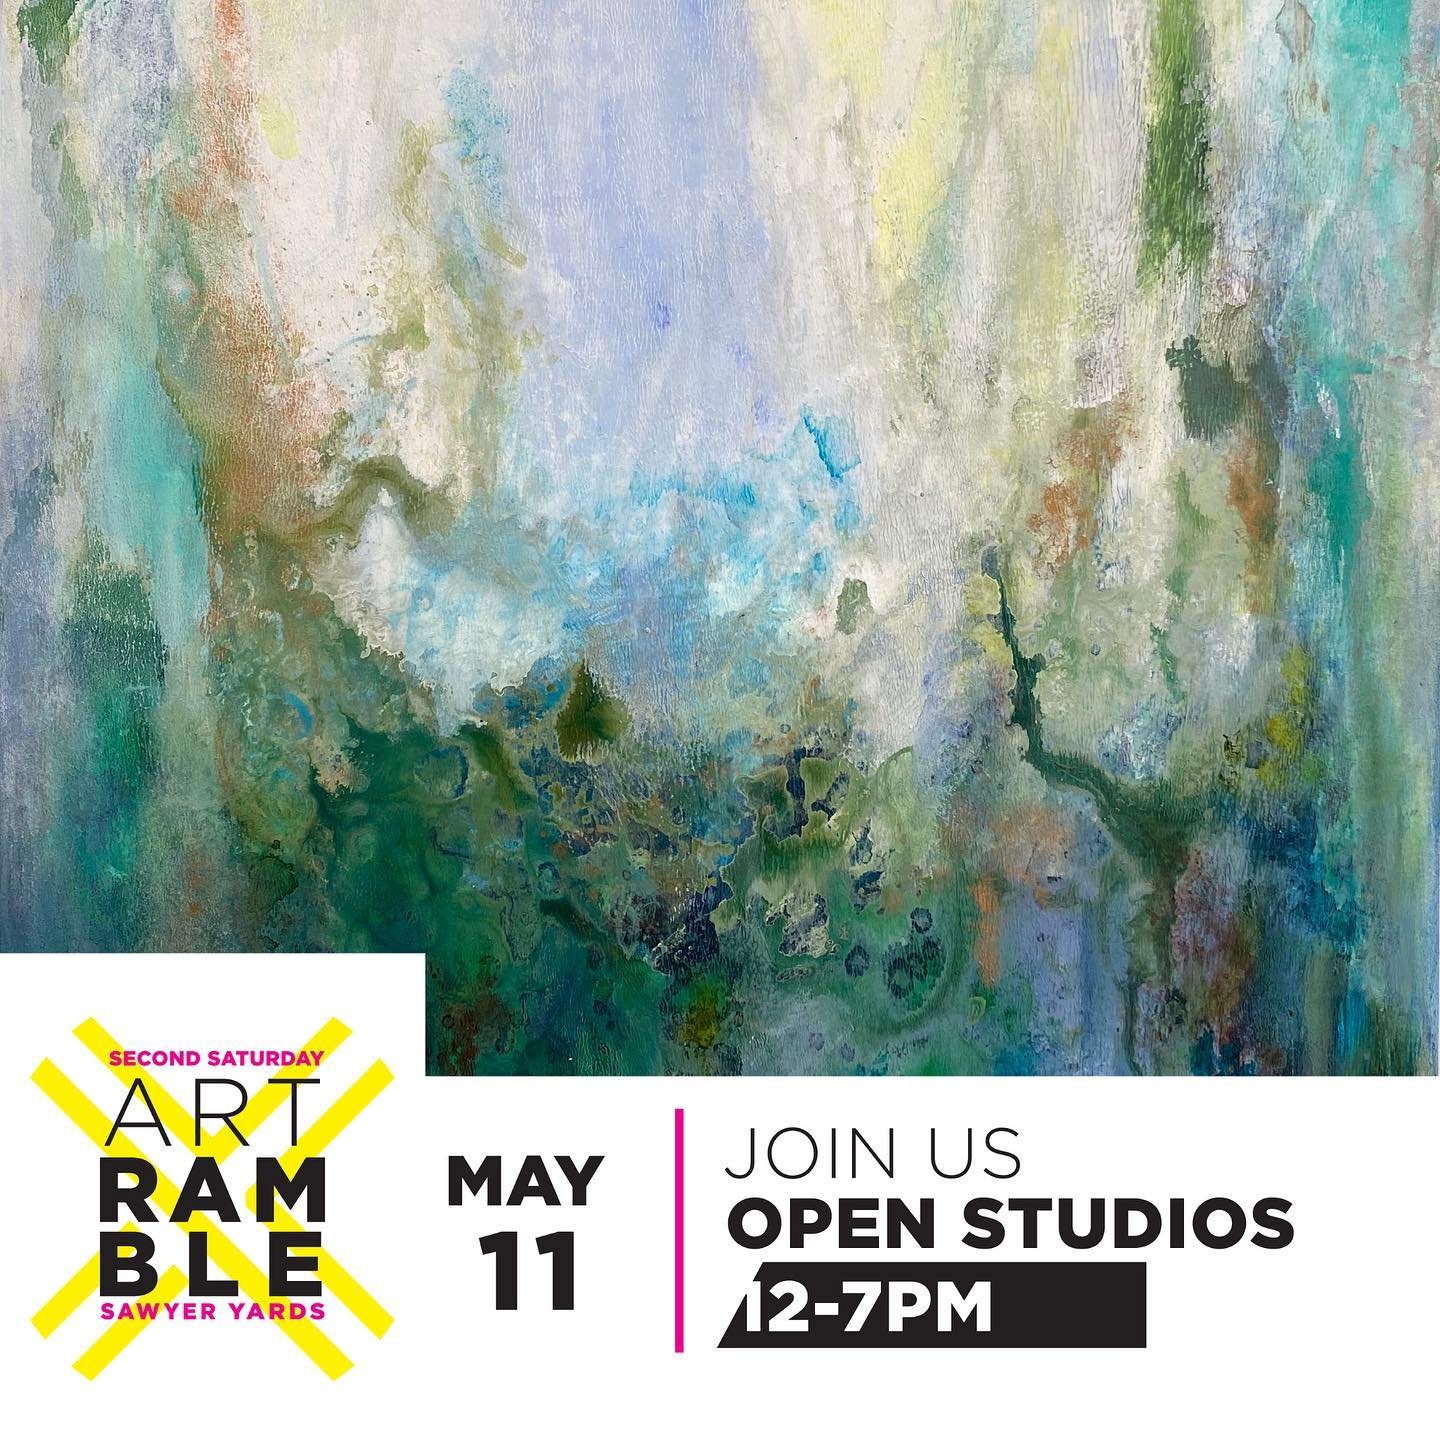 This Saturday 12-7 is our big spring event @sawyeryards! Join us for a special Second Saturday Art Ramble at the entire campus - our studio is A210 (upstairs) at Winter Street Studios. There will be tons of fresh art, kids art activities, beer sample